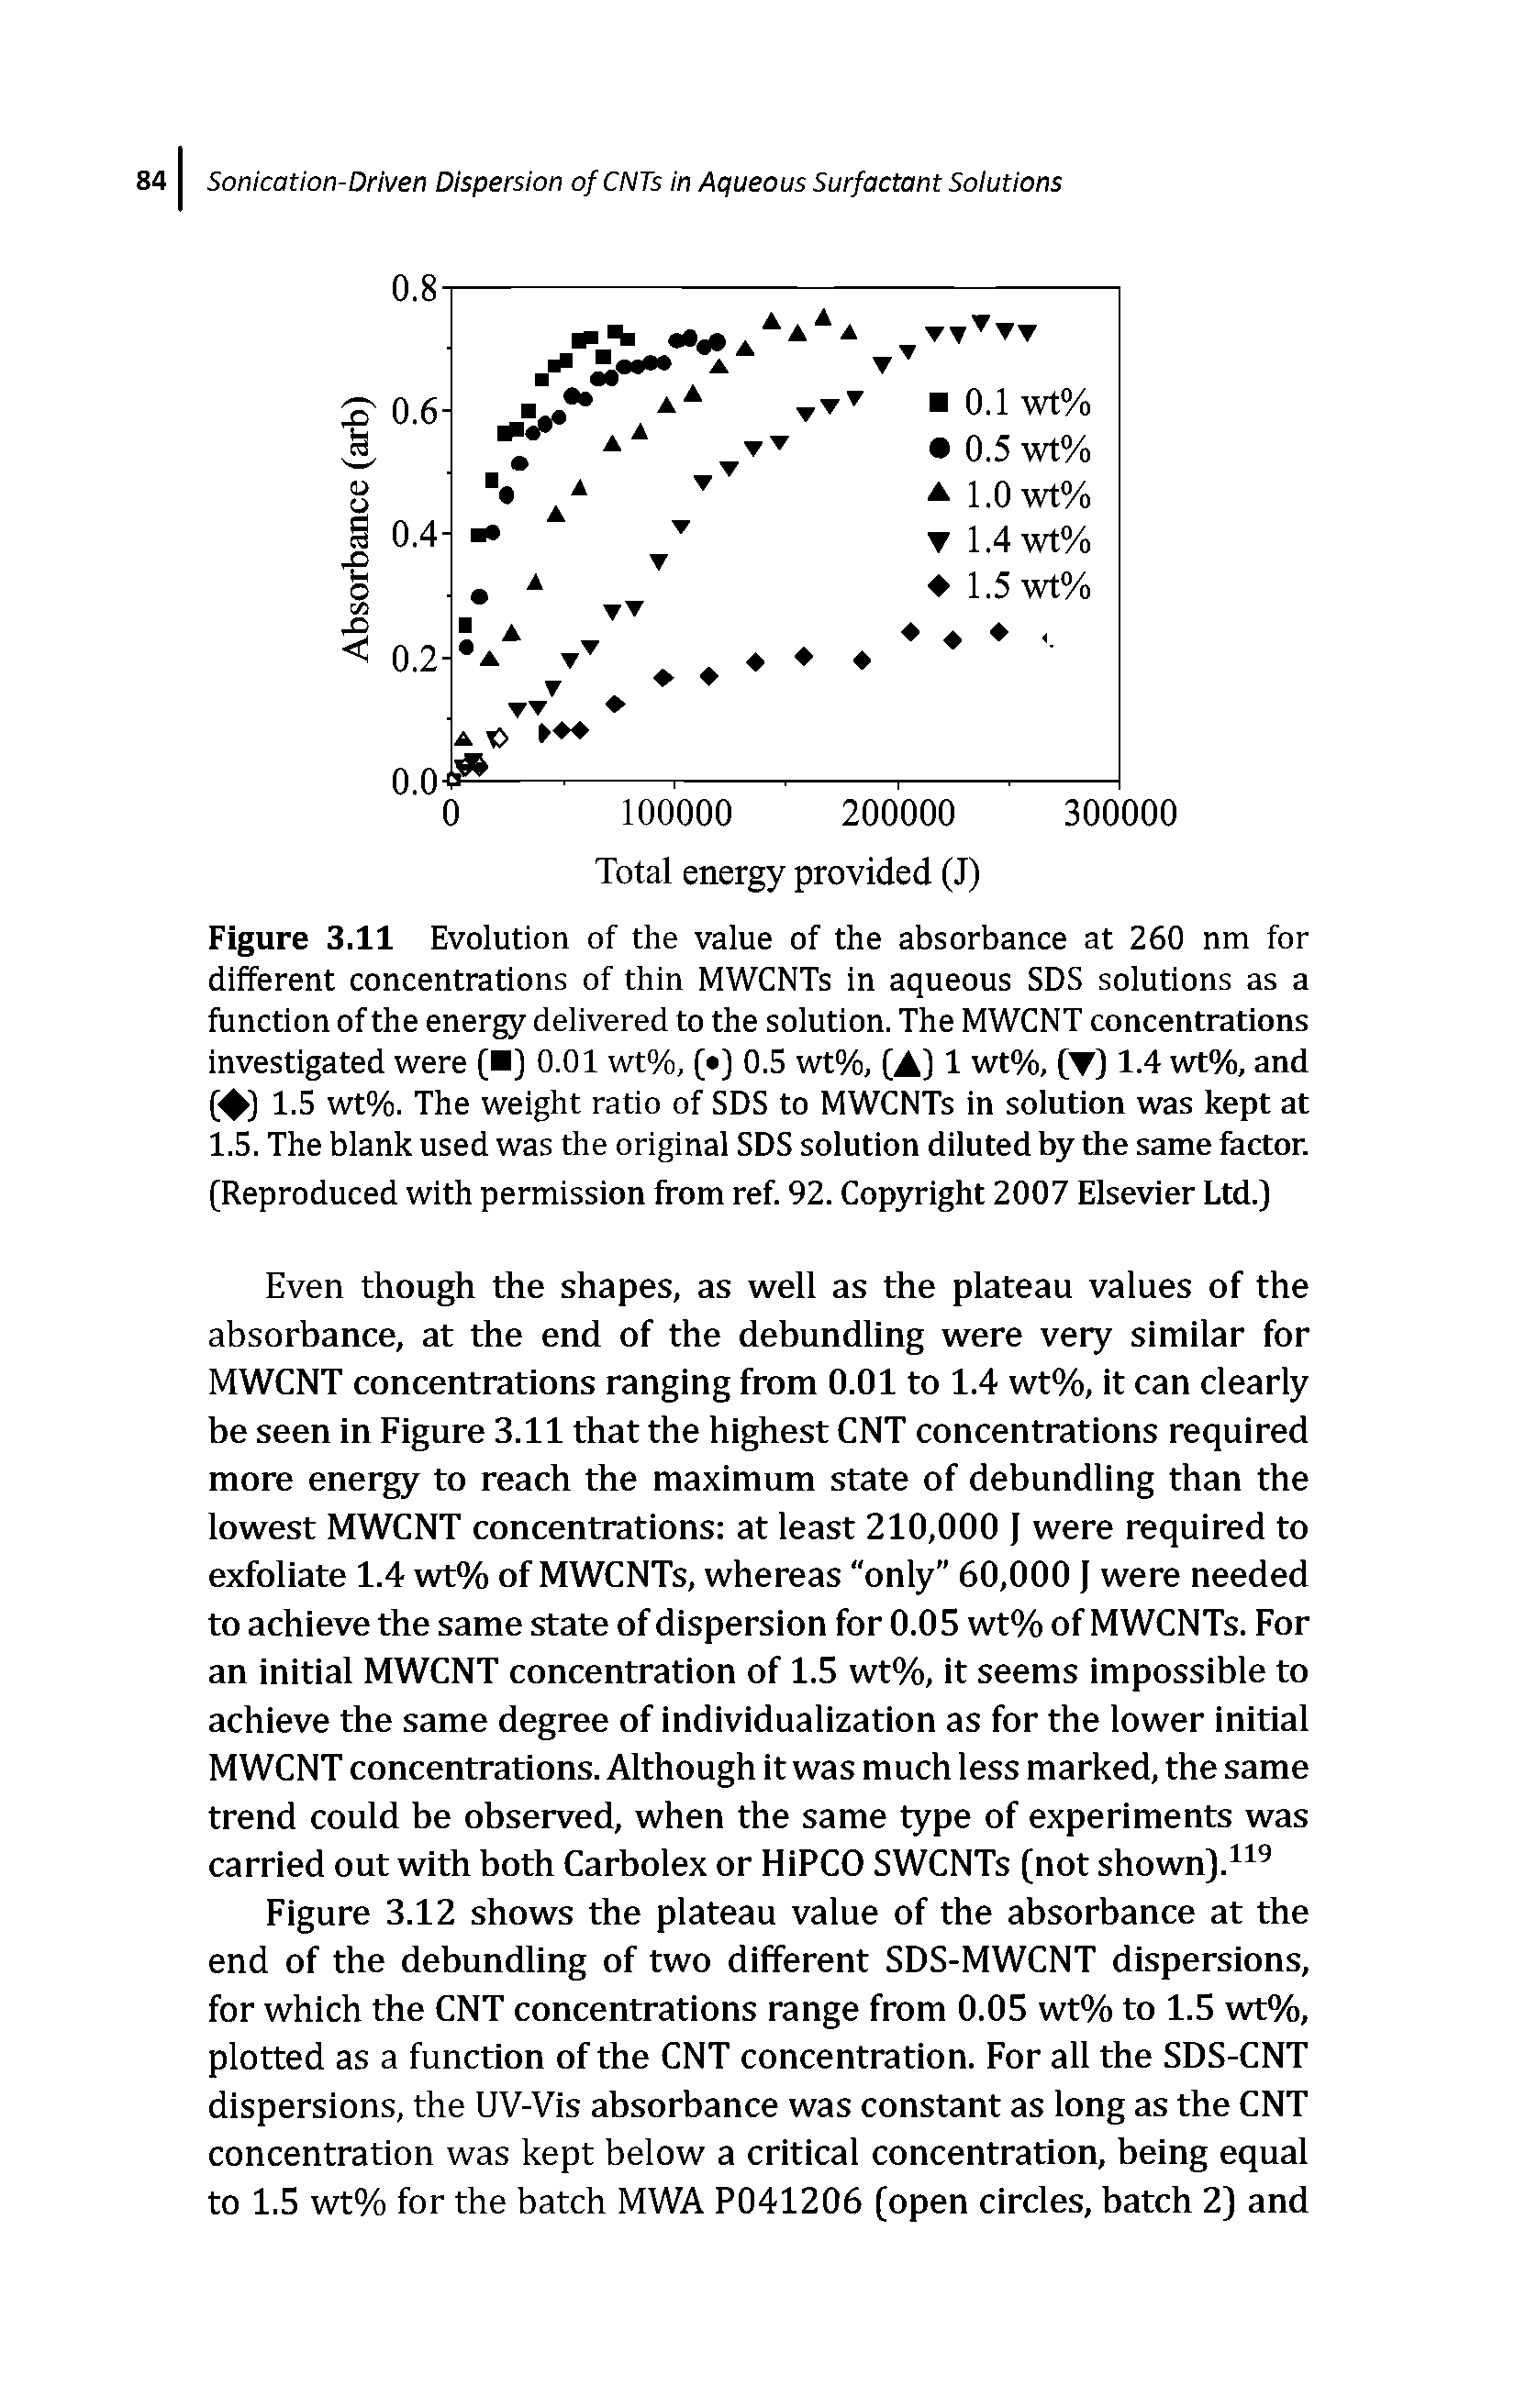 Figure 3.11 Evolution of the value of the absorbance at 260 nm for different concentrations of thin MWCNTs in aqueous SDS solutions as a function of the energy delivered to the solution. The MWCNT concentrations investigated were 0.01 wt%, 0.5 wt%, (A] 1 wt%, (T) 1.4 wt%, and 1.5 wt%. The weight ratio of SDS to MWCNTs in solution was kept at 1.5. The blank used was the original SDS solution diluted by the same factor. (Reproduced with permission from ref. 92. Copyright 2007 Elsevier Ltd.)...